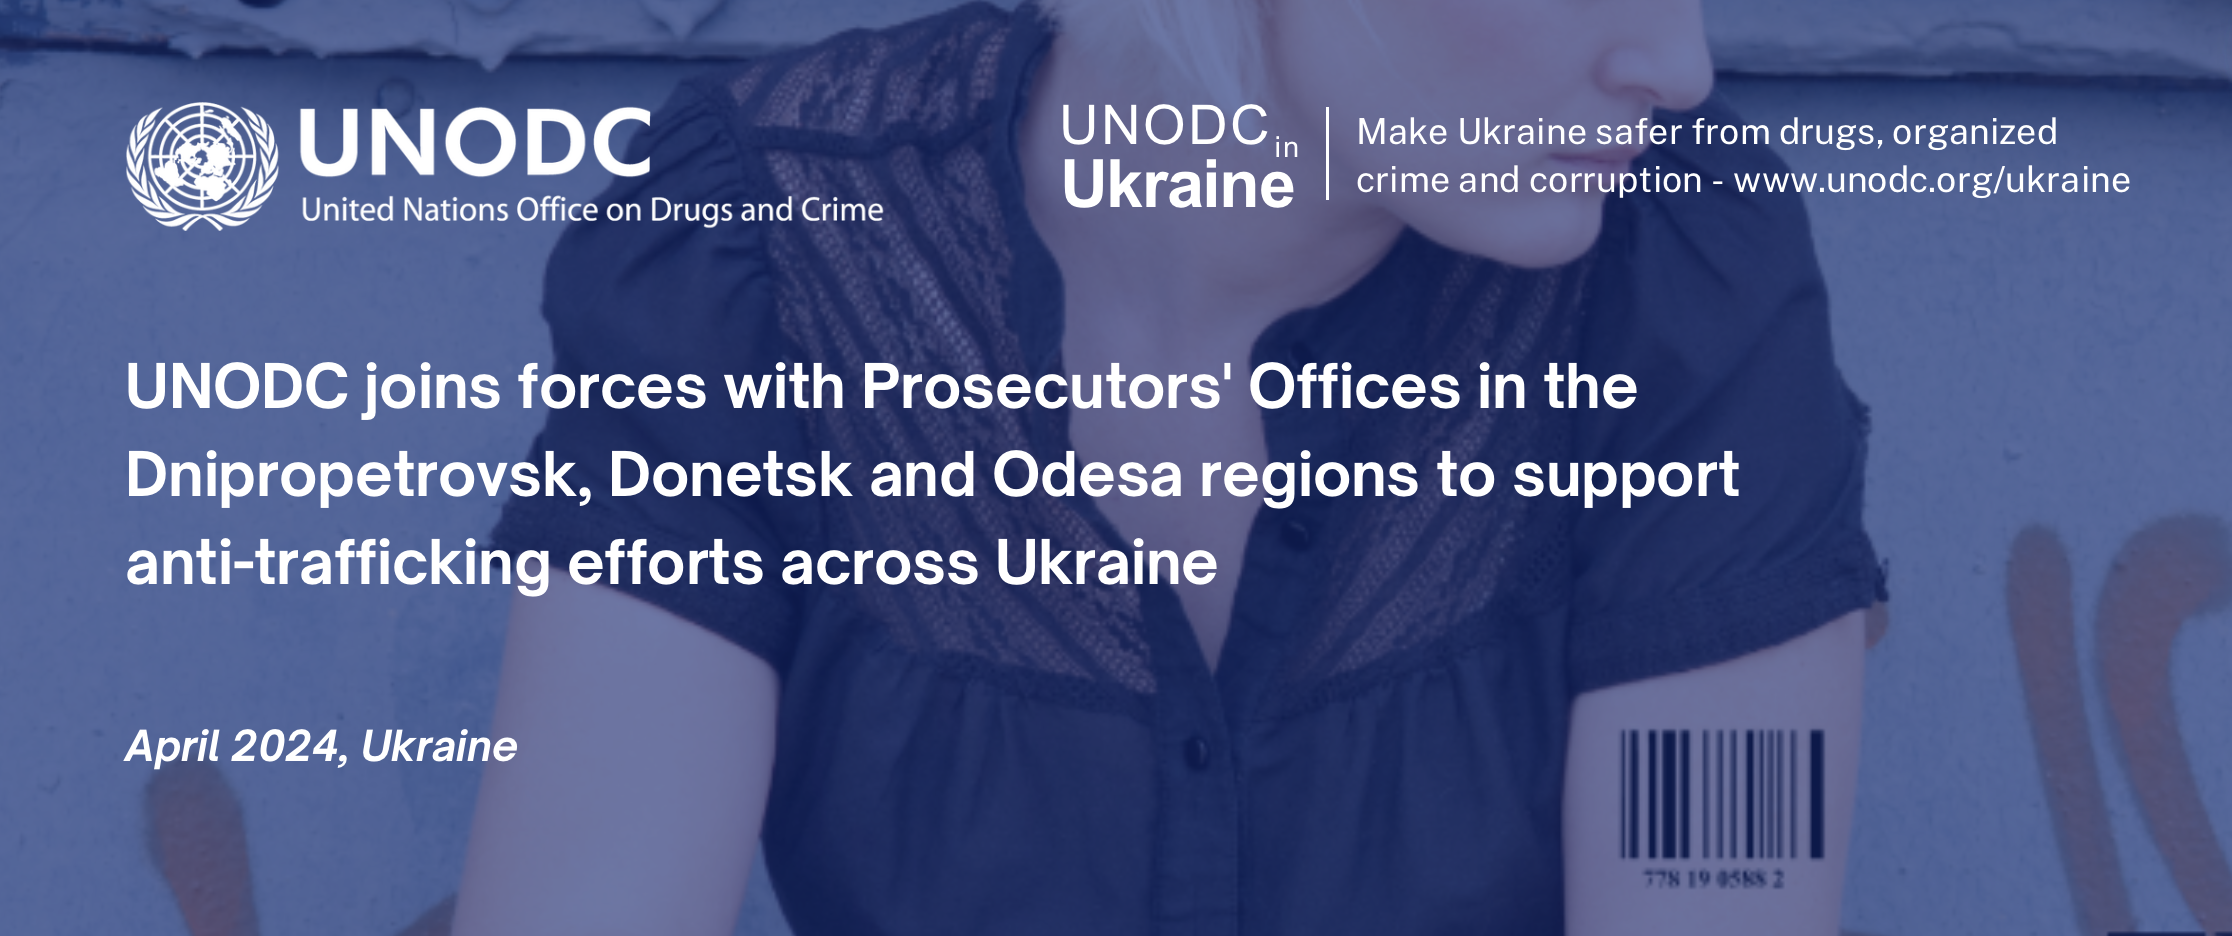 UNODC joins forces with Prosecutors' Offices in the Dnipropetrovsk, Donetsk and Odesa regions to support anti-trafficking efforts across Ukraine